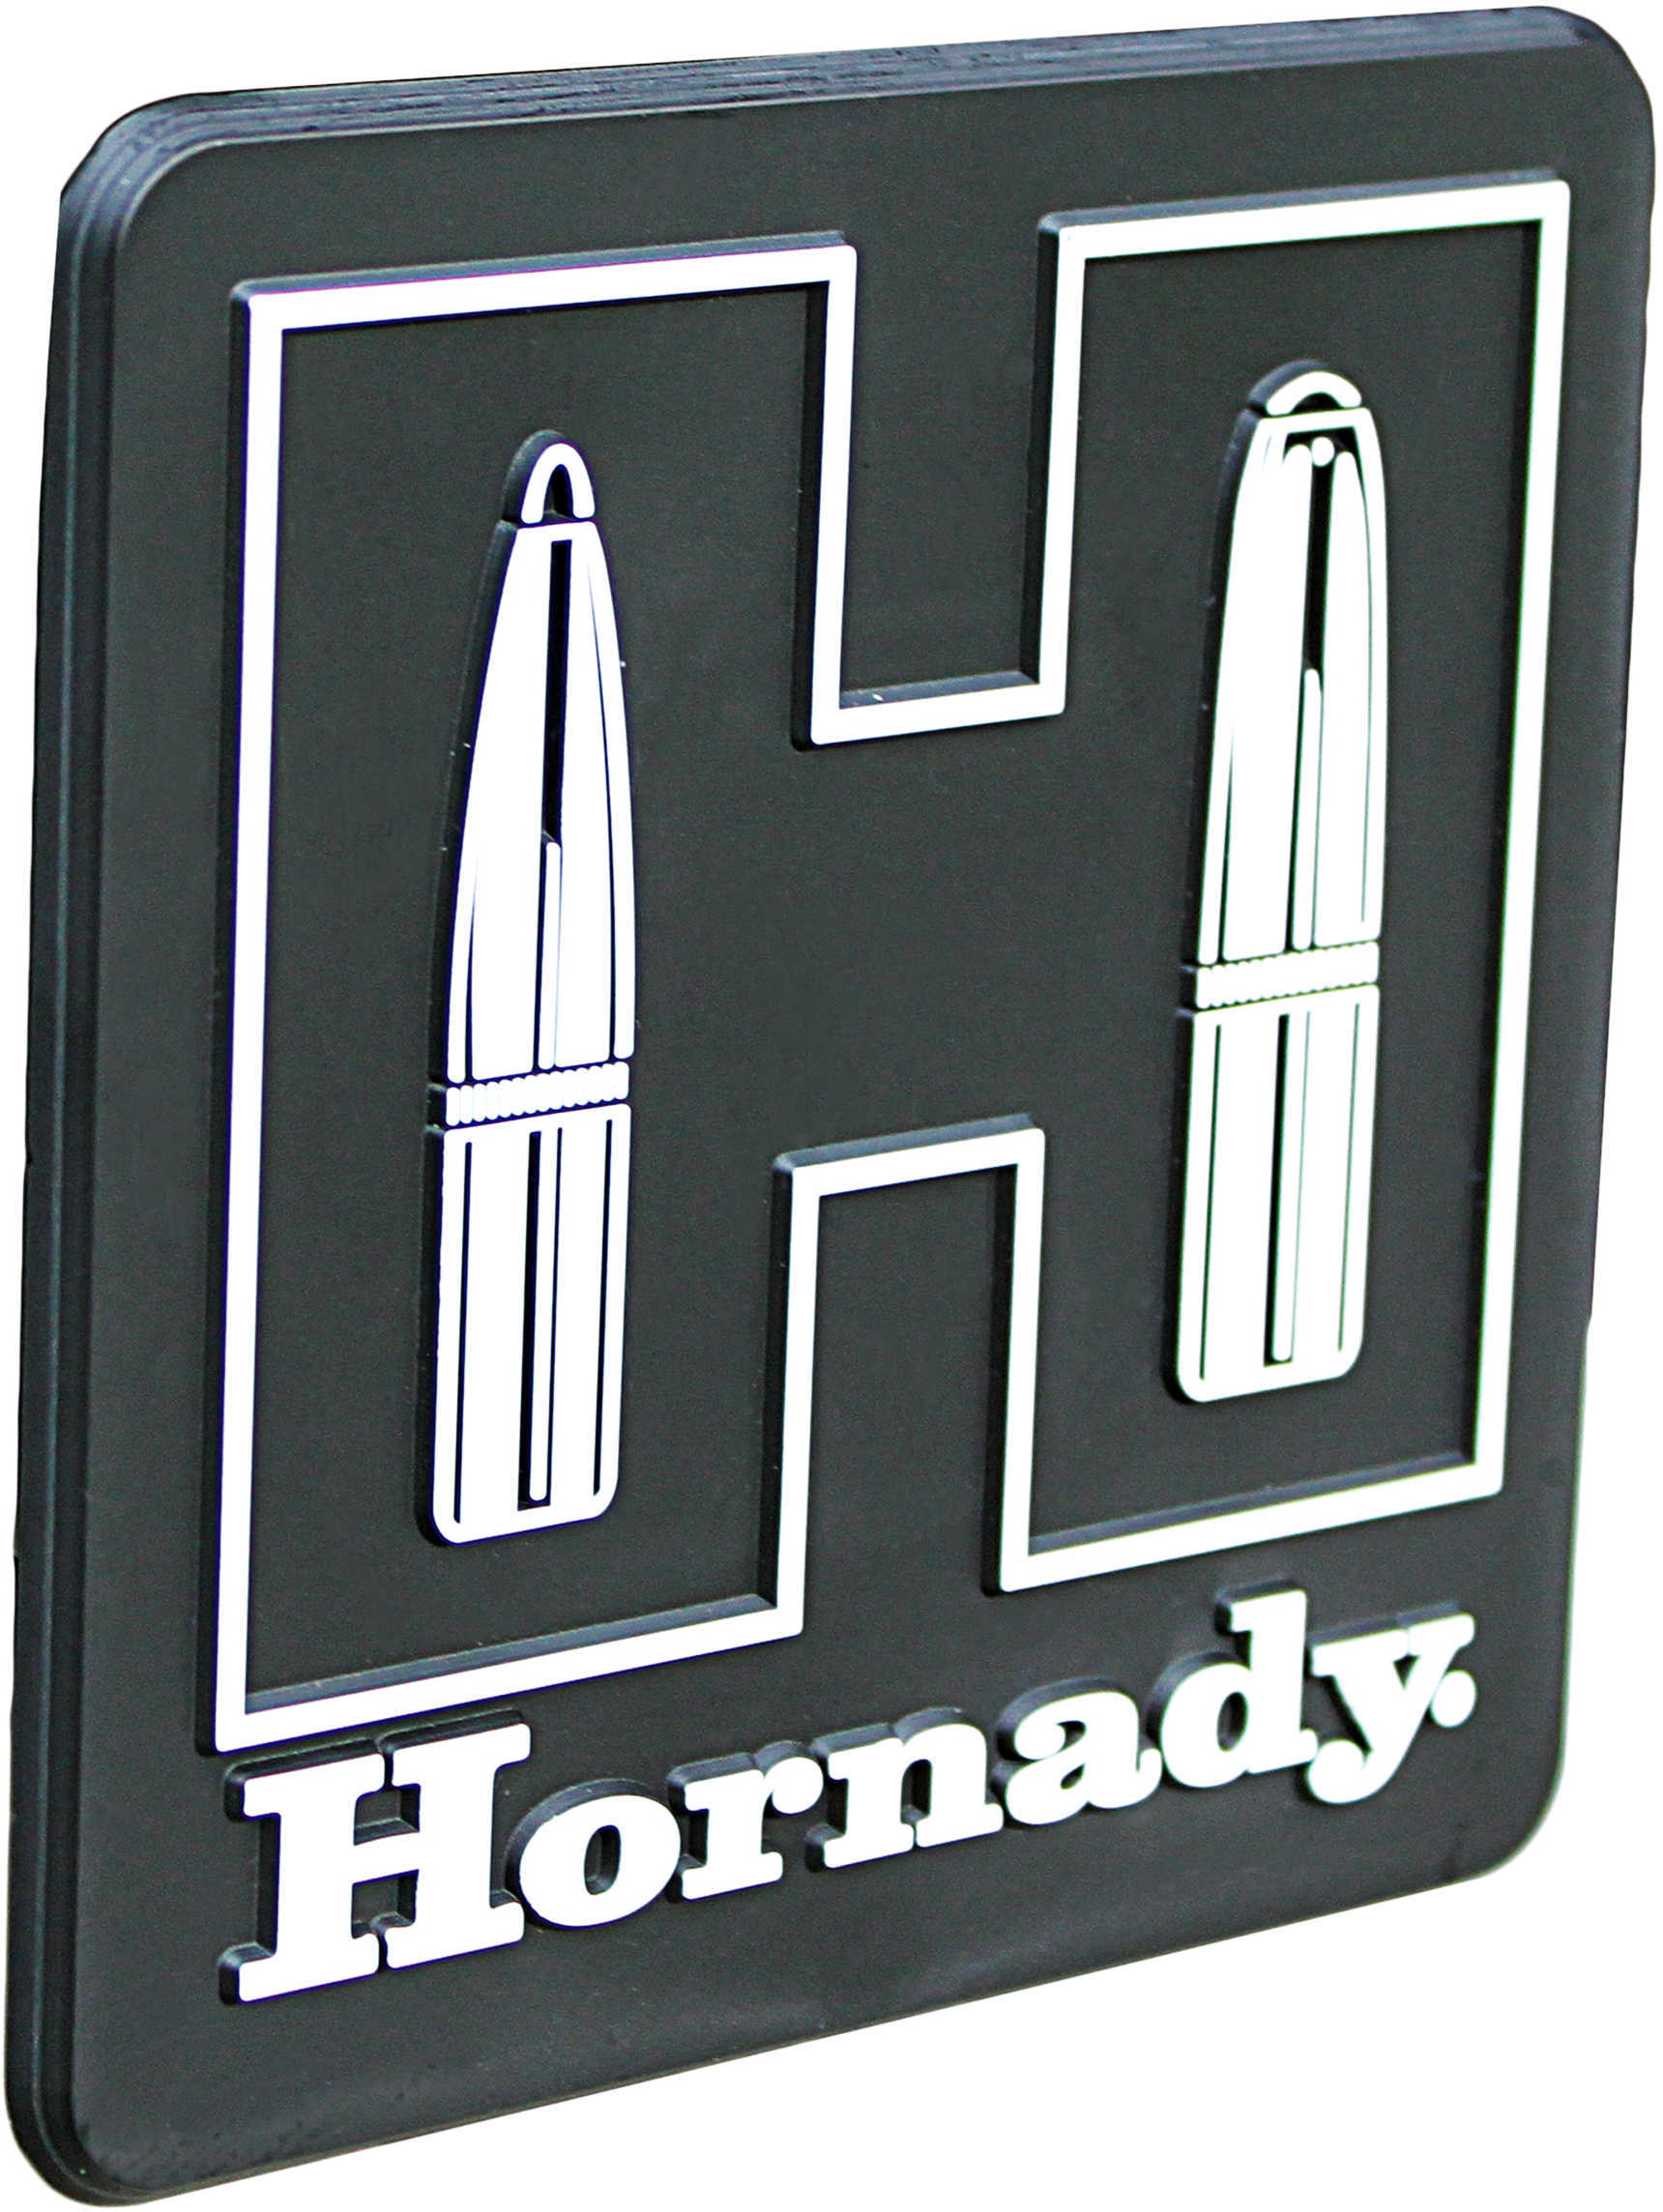 Hornady Hitch Cover 2" Snap Clips Plastic Black/White Md: 99132